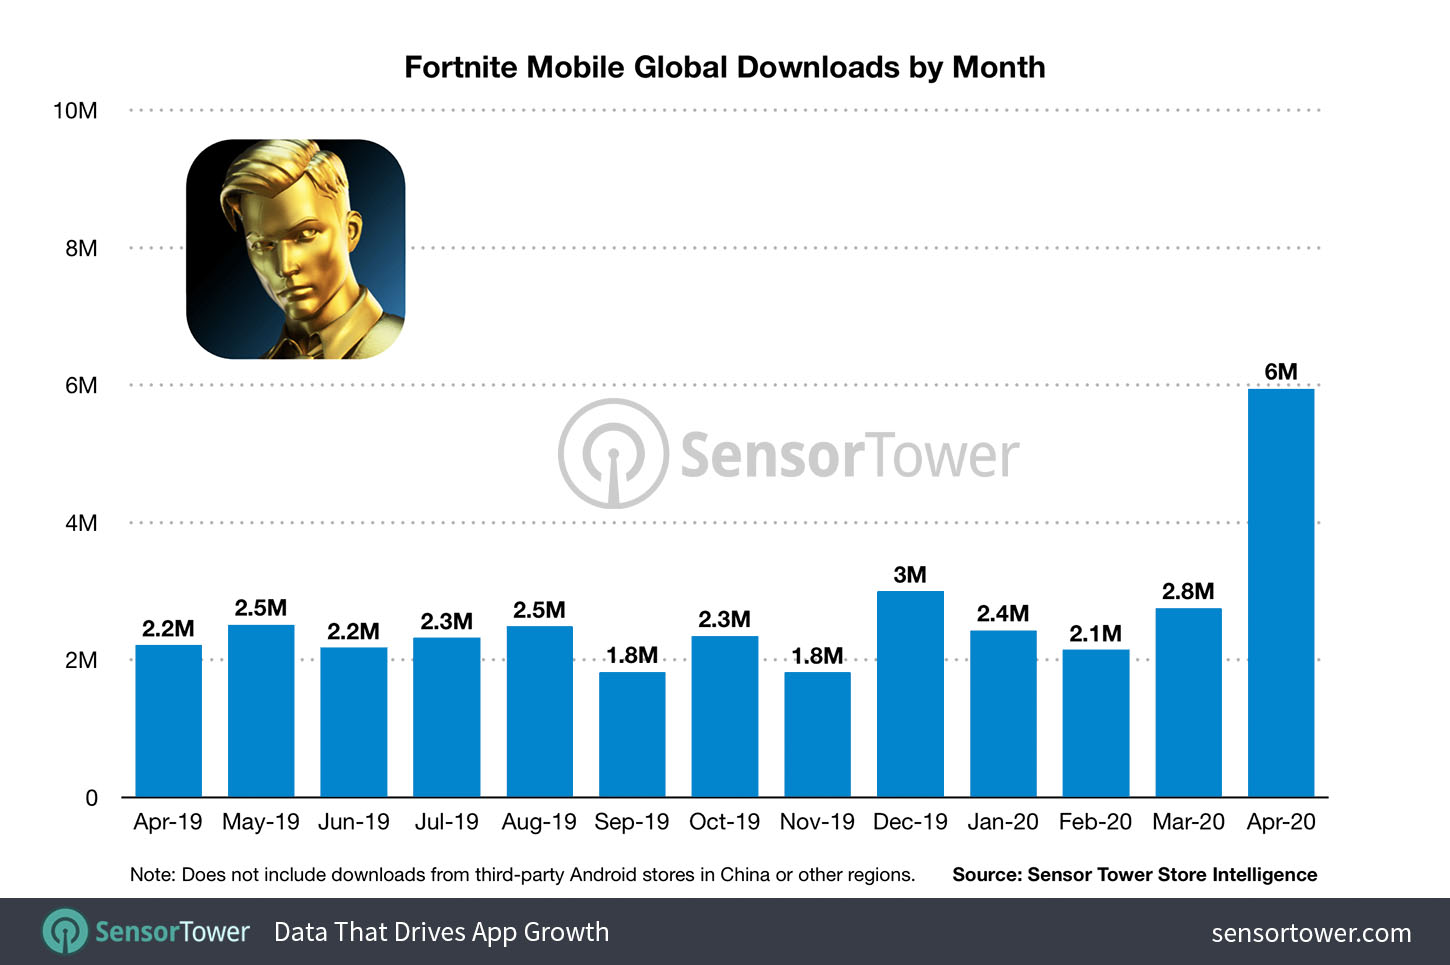 Fortnite Mobile Global Downloads by Month